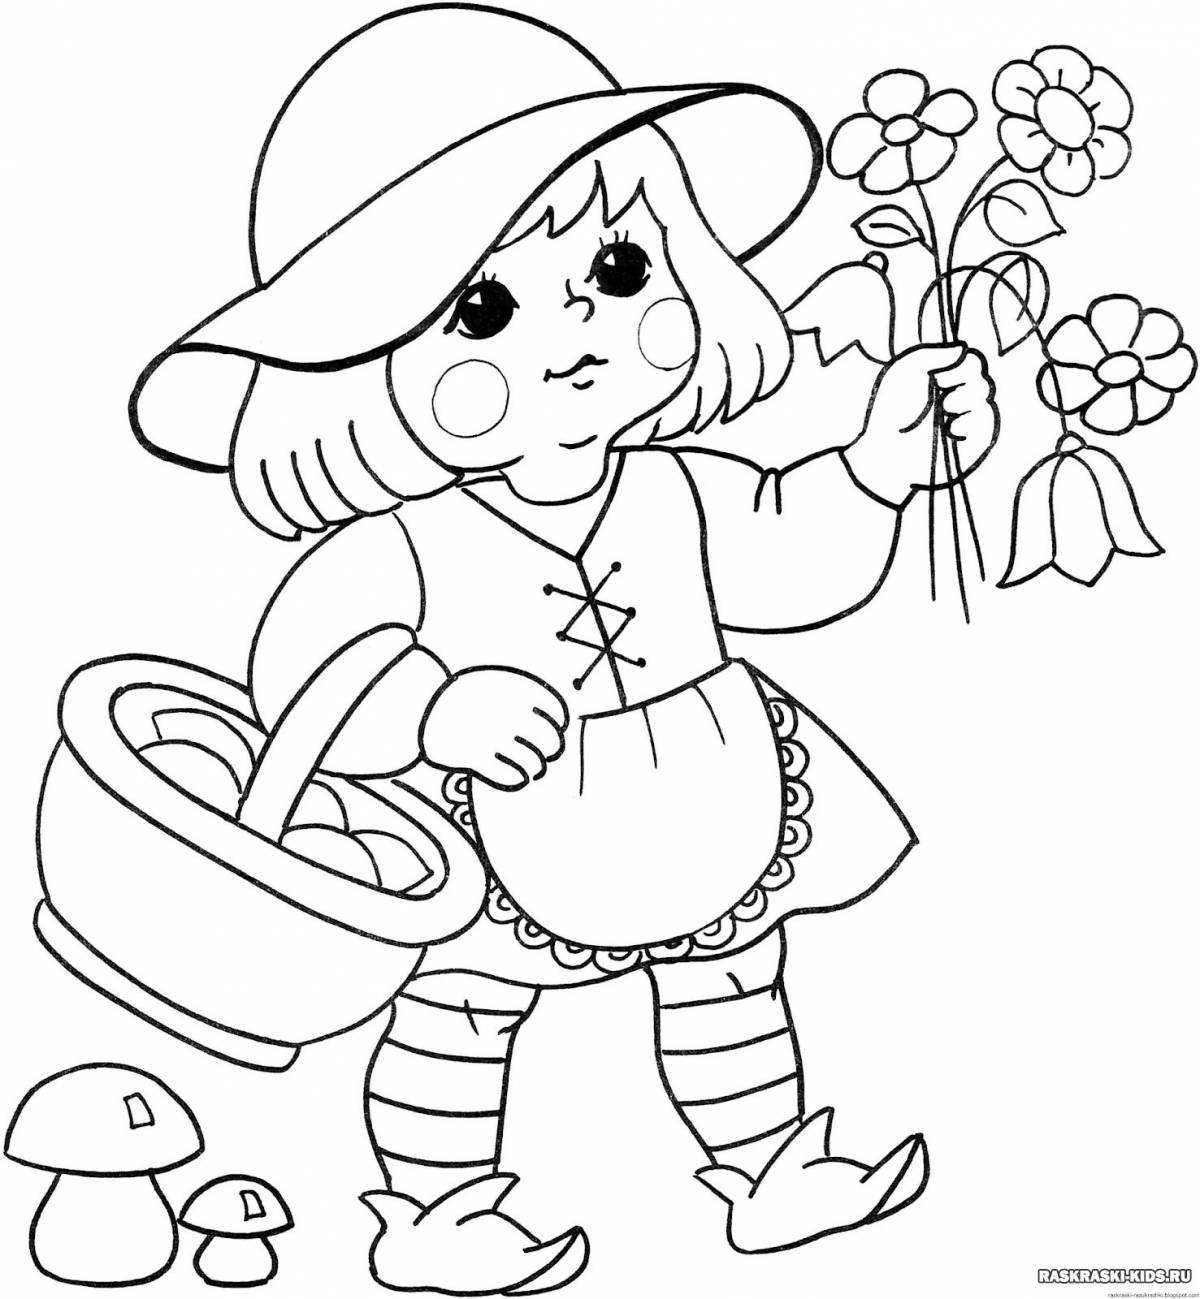 Delightful coloring book for girls 3-5 years old